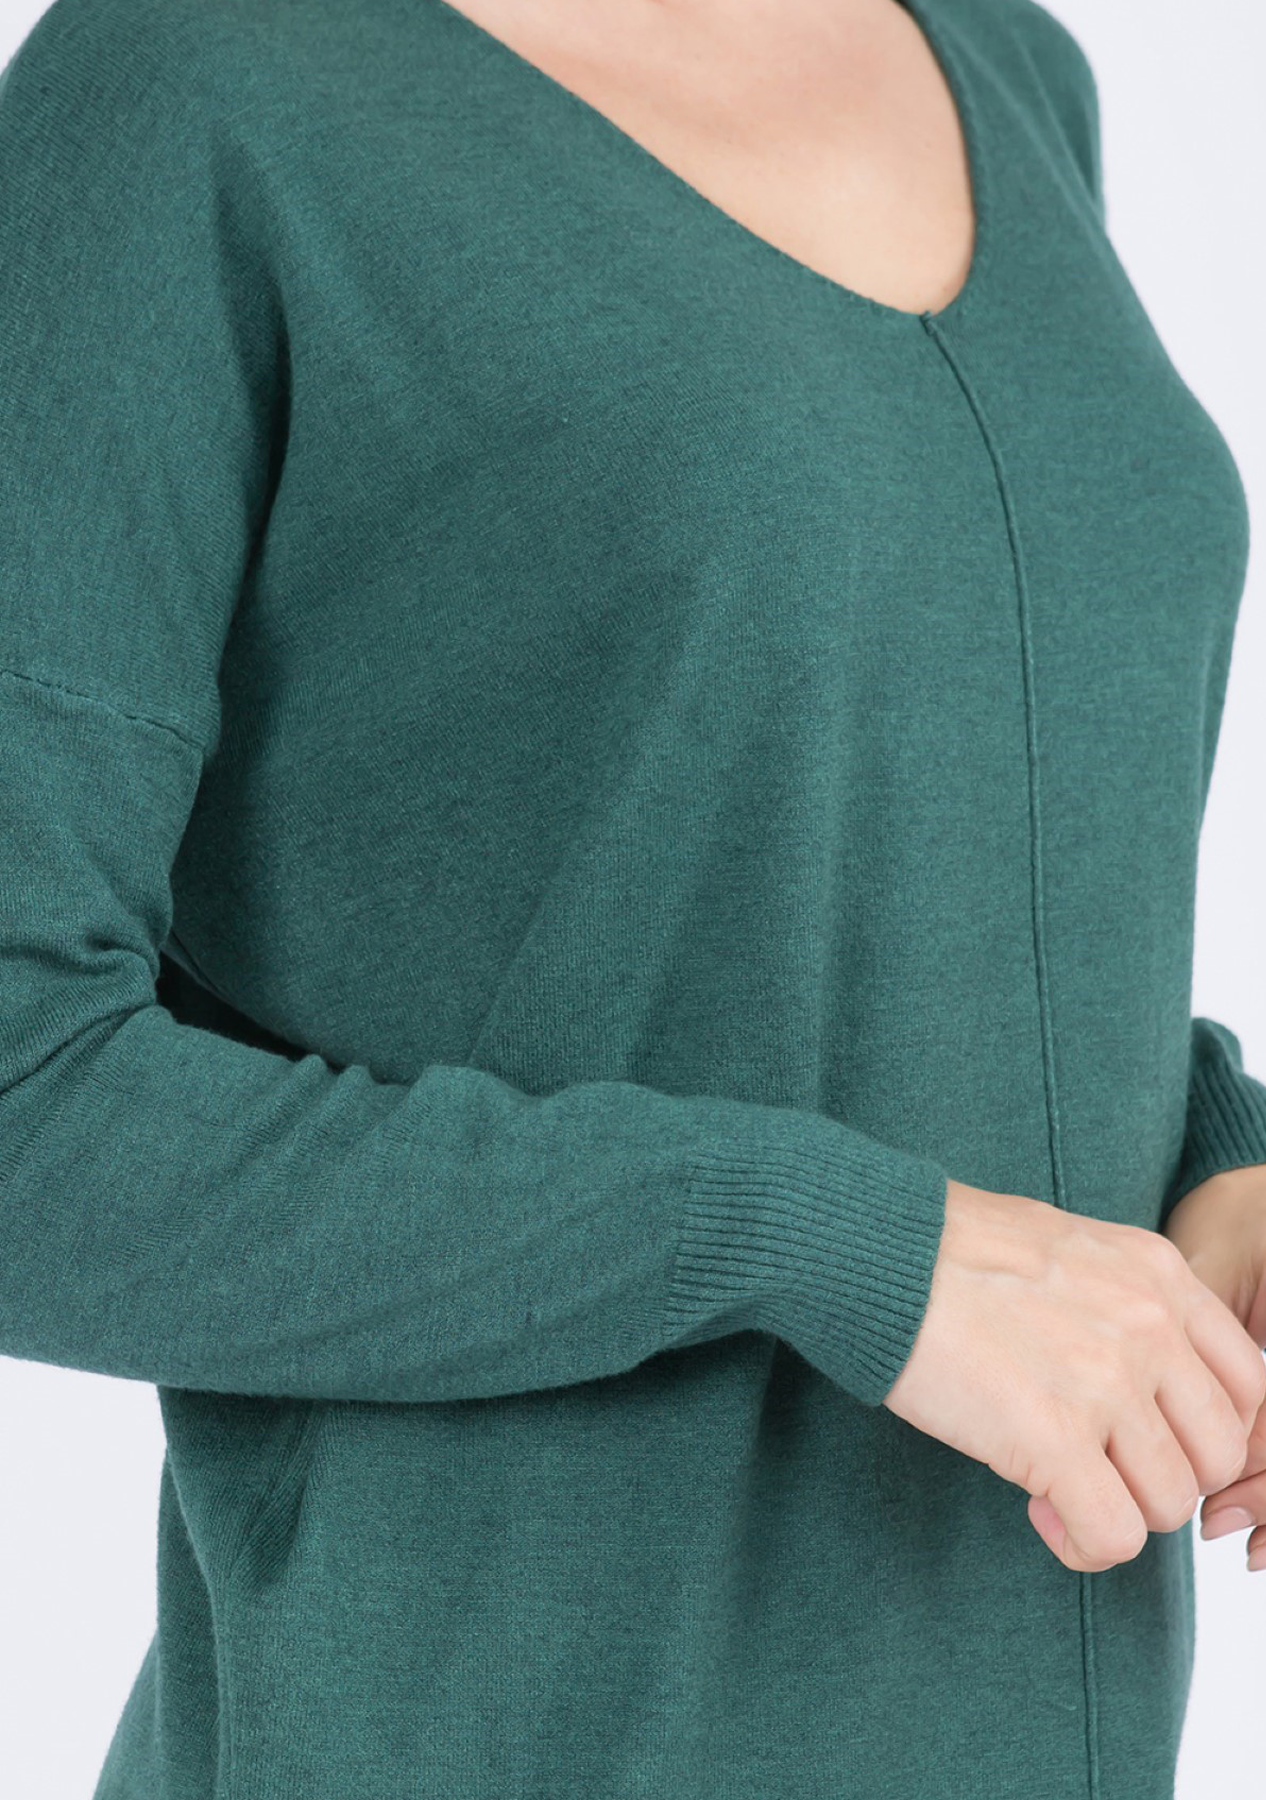 Shop Trendy Sweaters for Women - Buy Now at The Latest Scoop